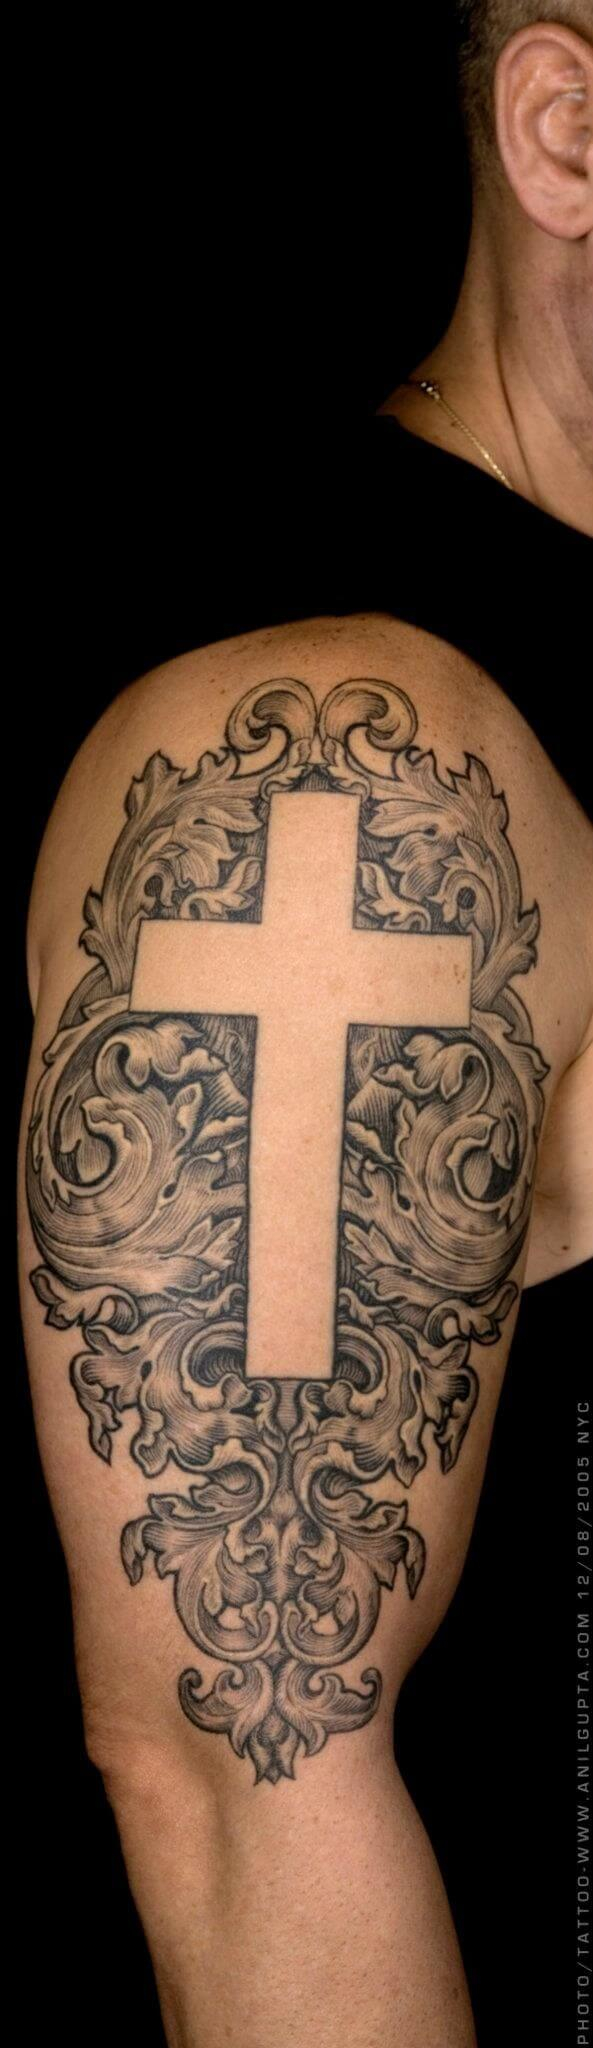 56 Best Cross Tattoos For Men Improb throughout dimensions 593 X 2048